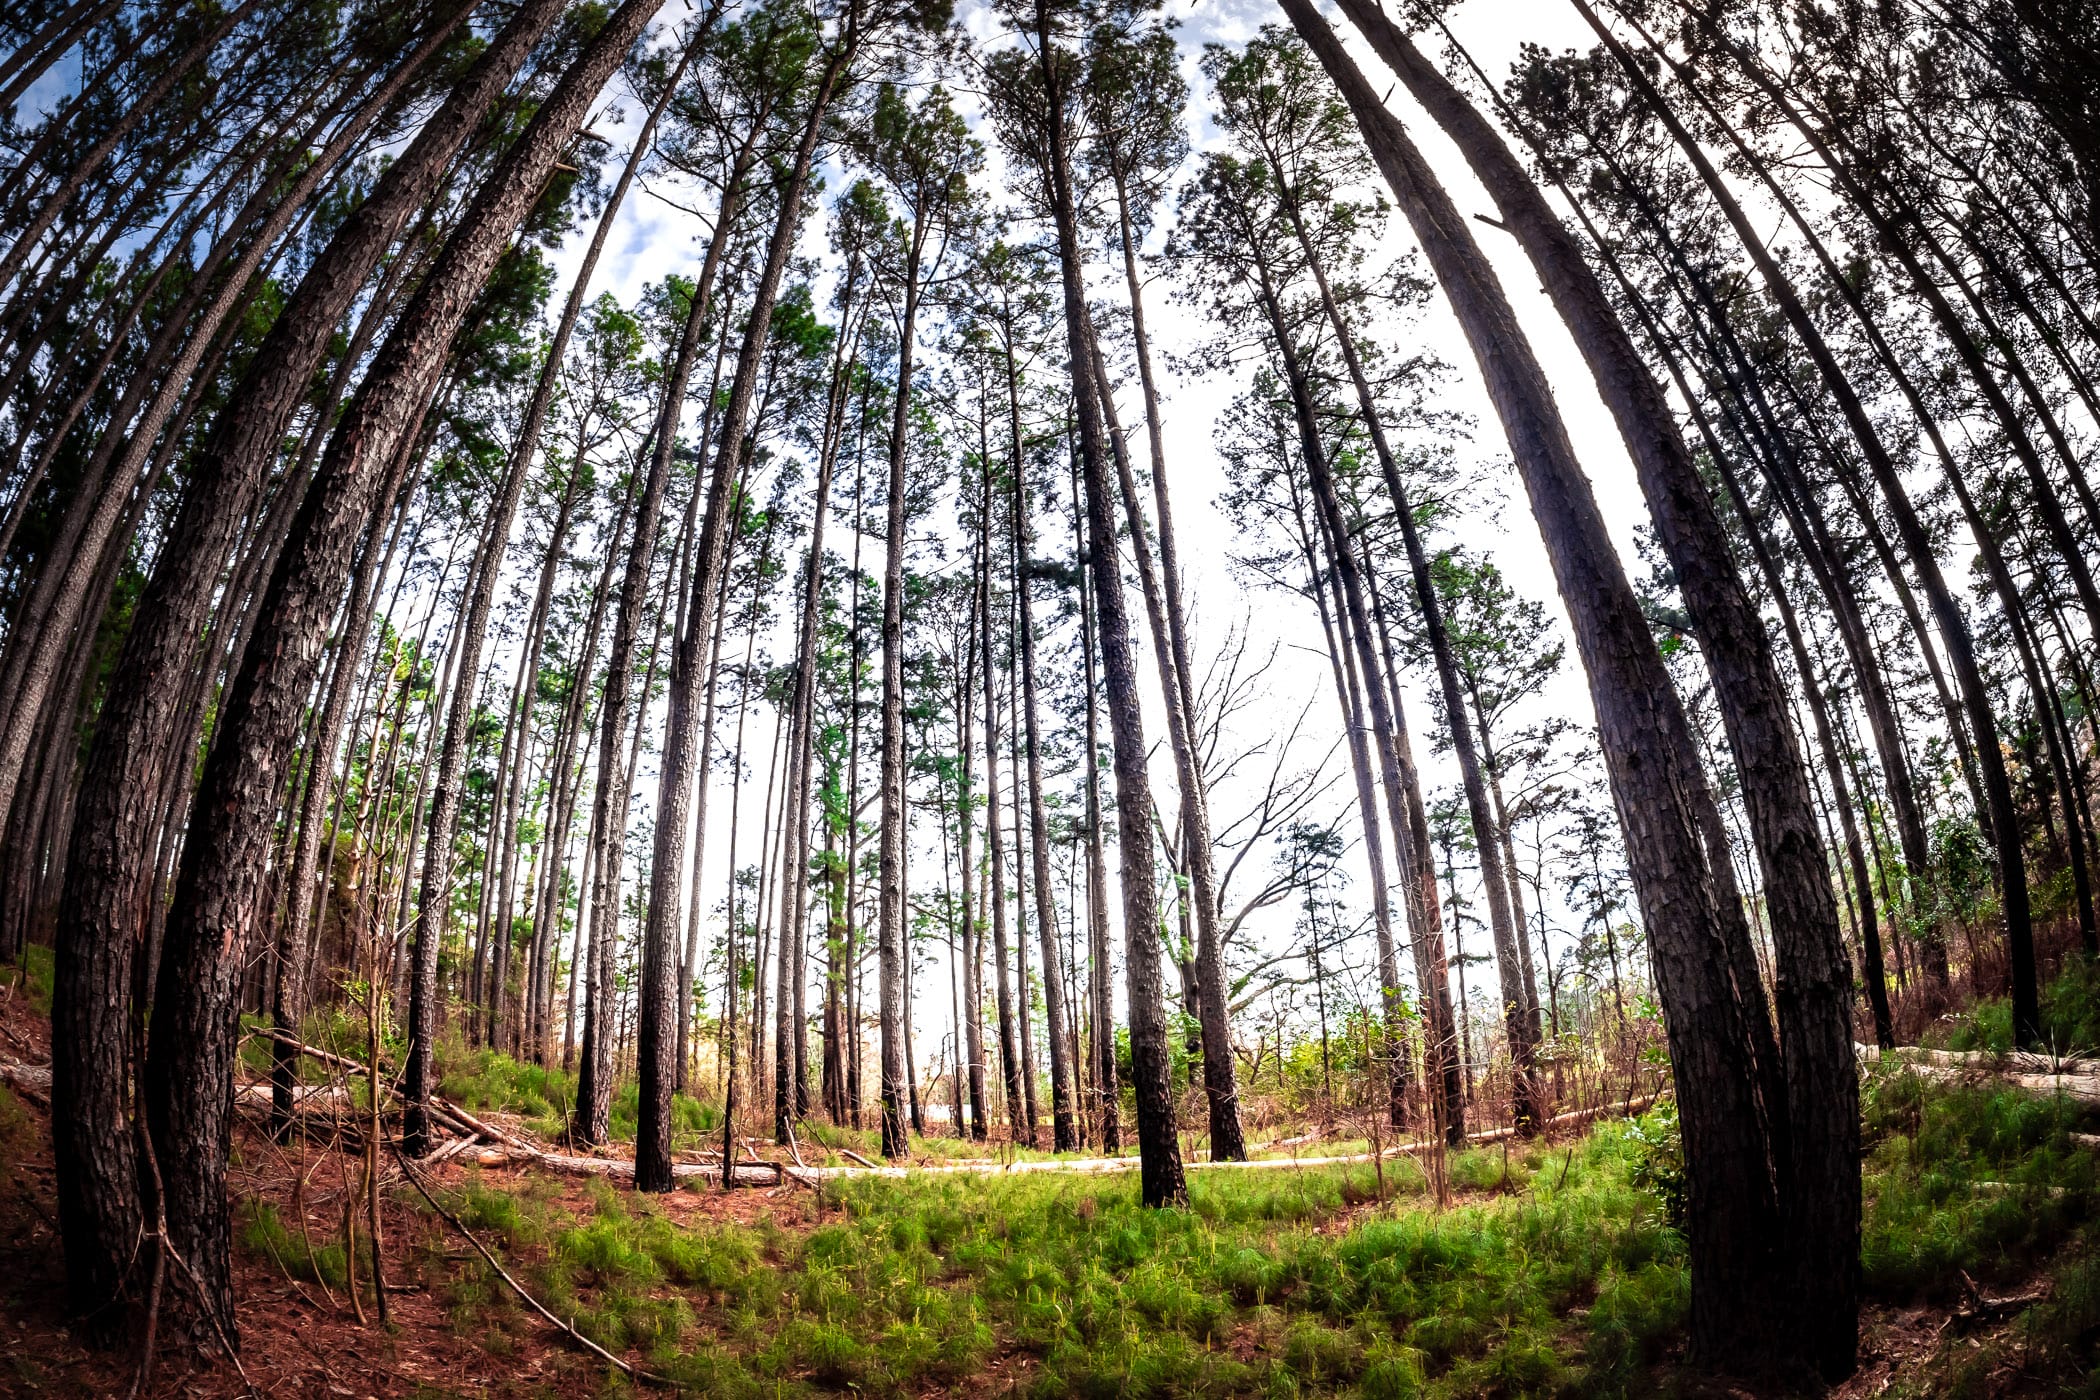 Pine trees reach into the sky at Tyler State Park, Texas.